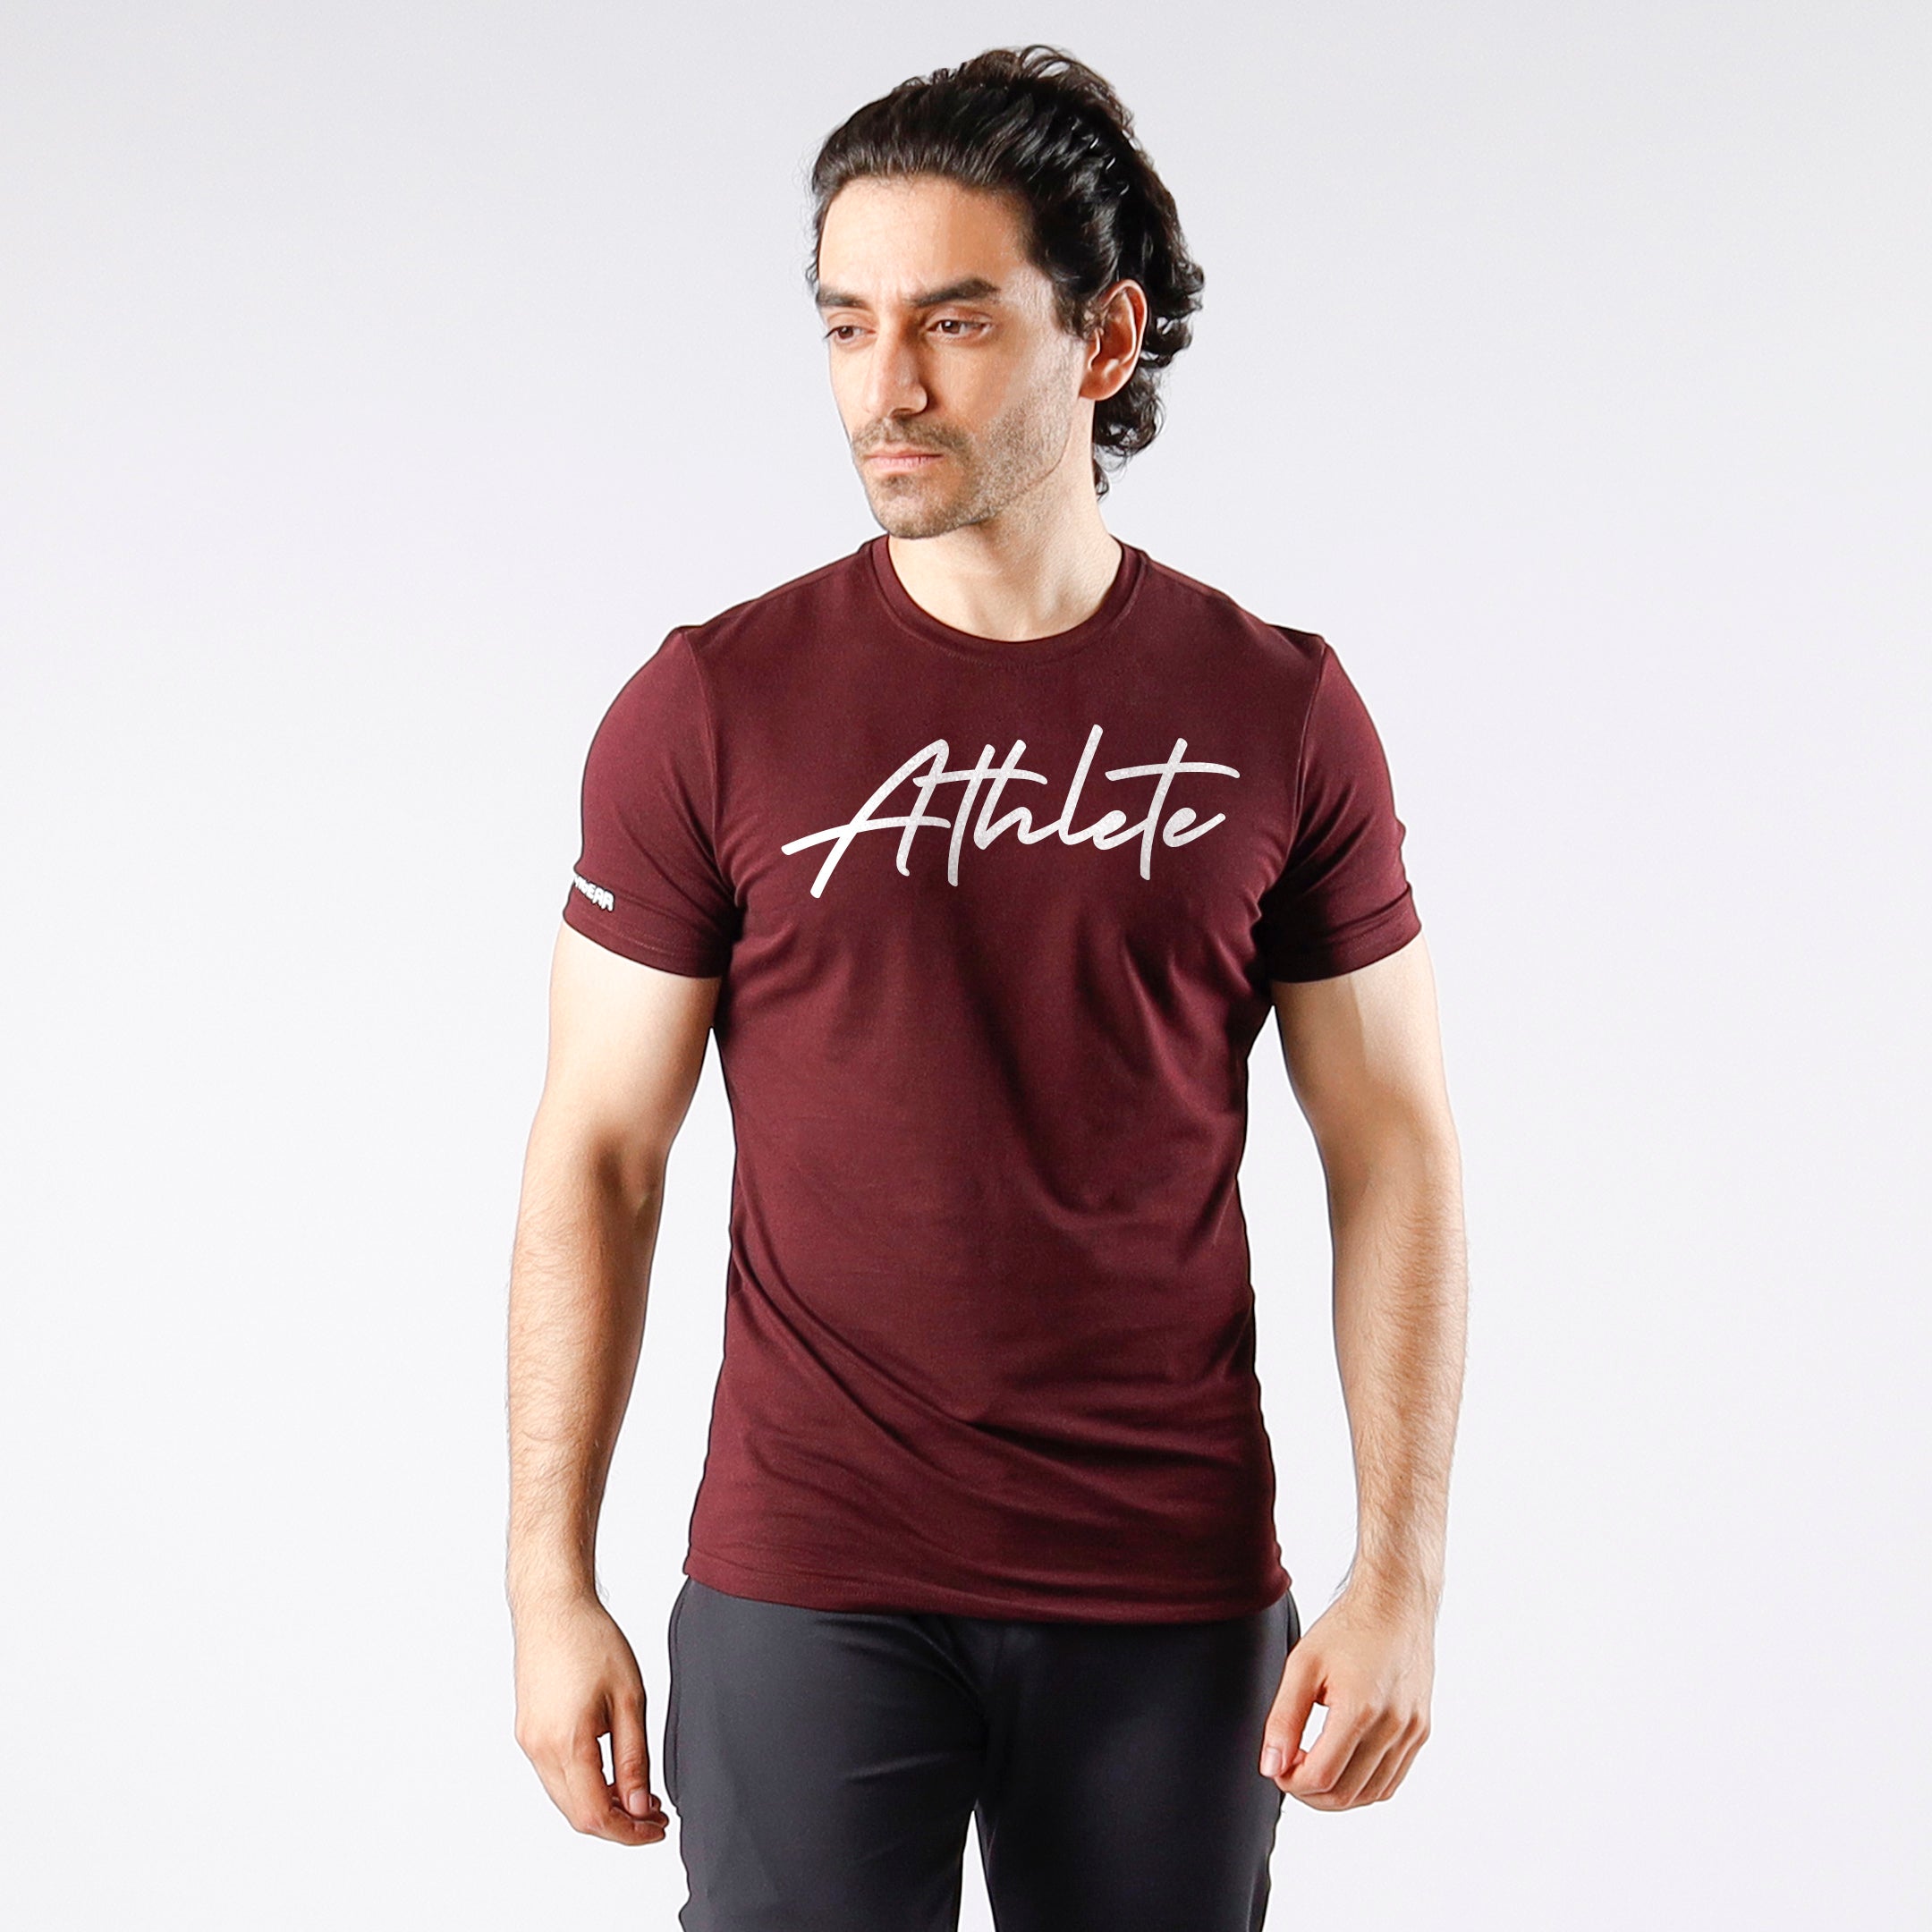 Athlete Tee For Mens